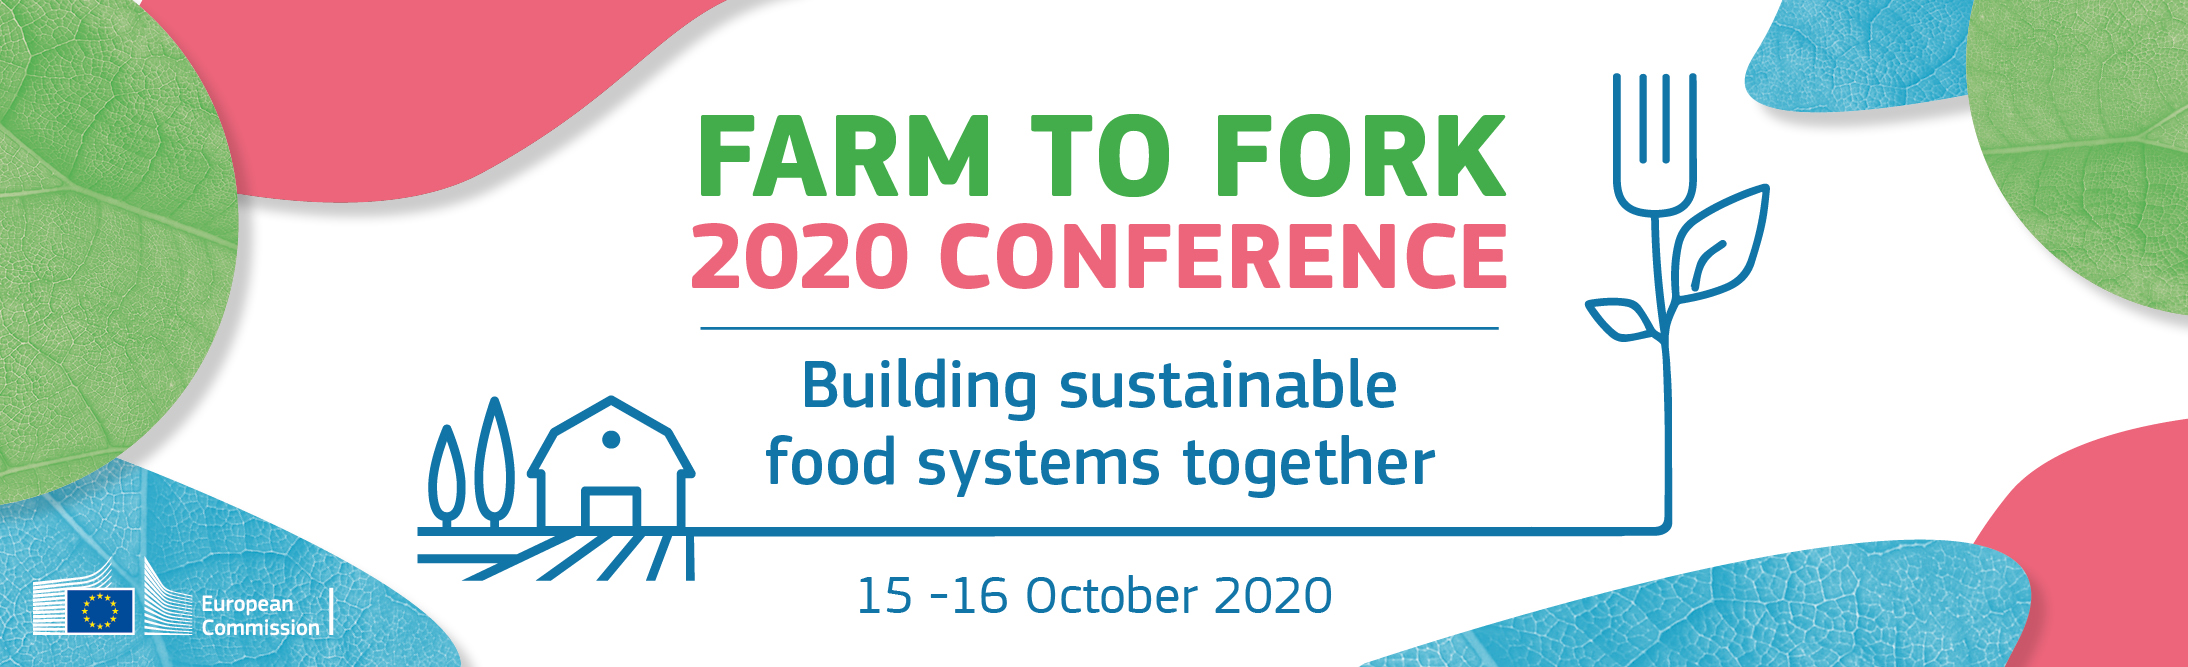 Farm to Fork 2020 conference - Building sustainable food systems together 15 - 16 October 2020